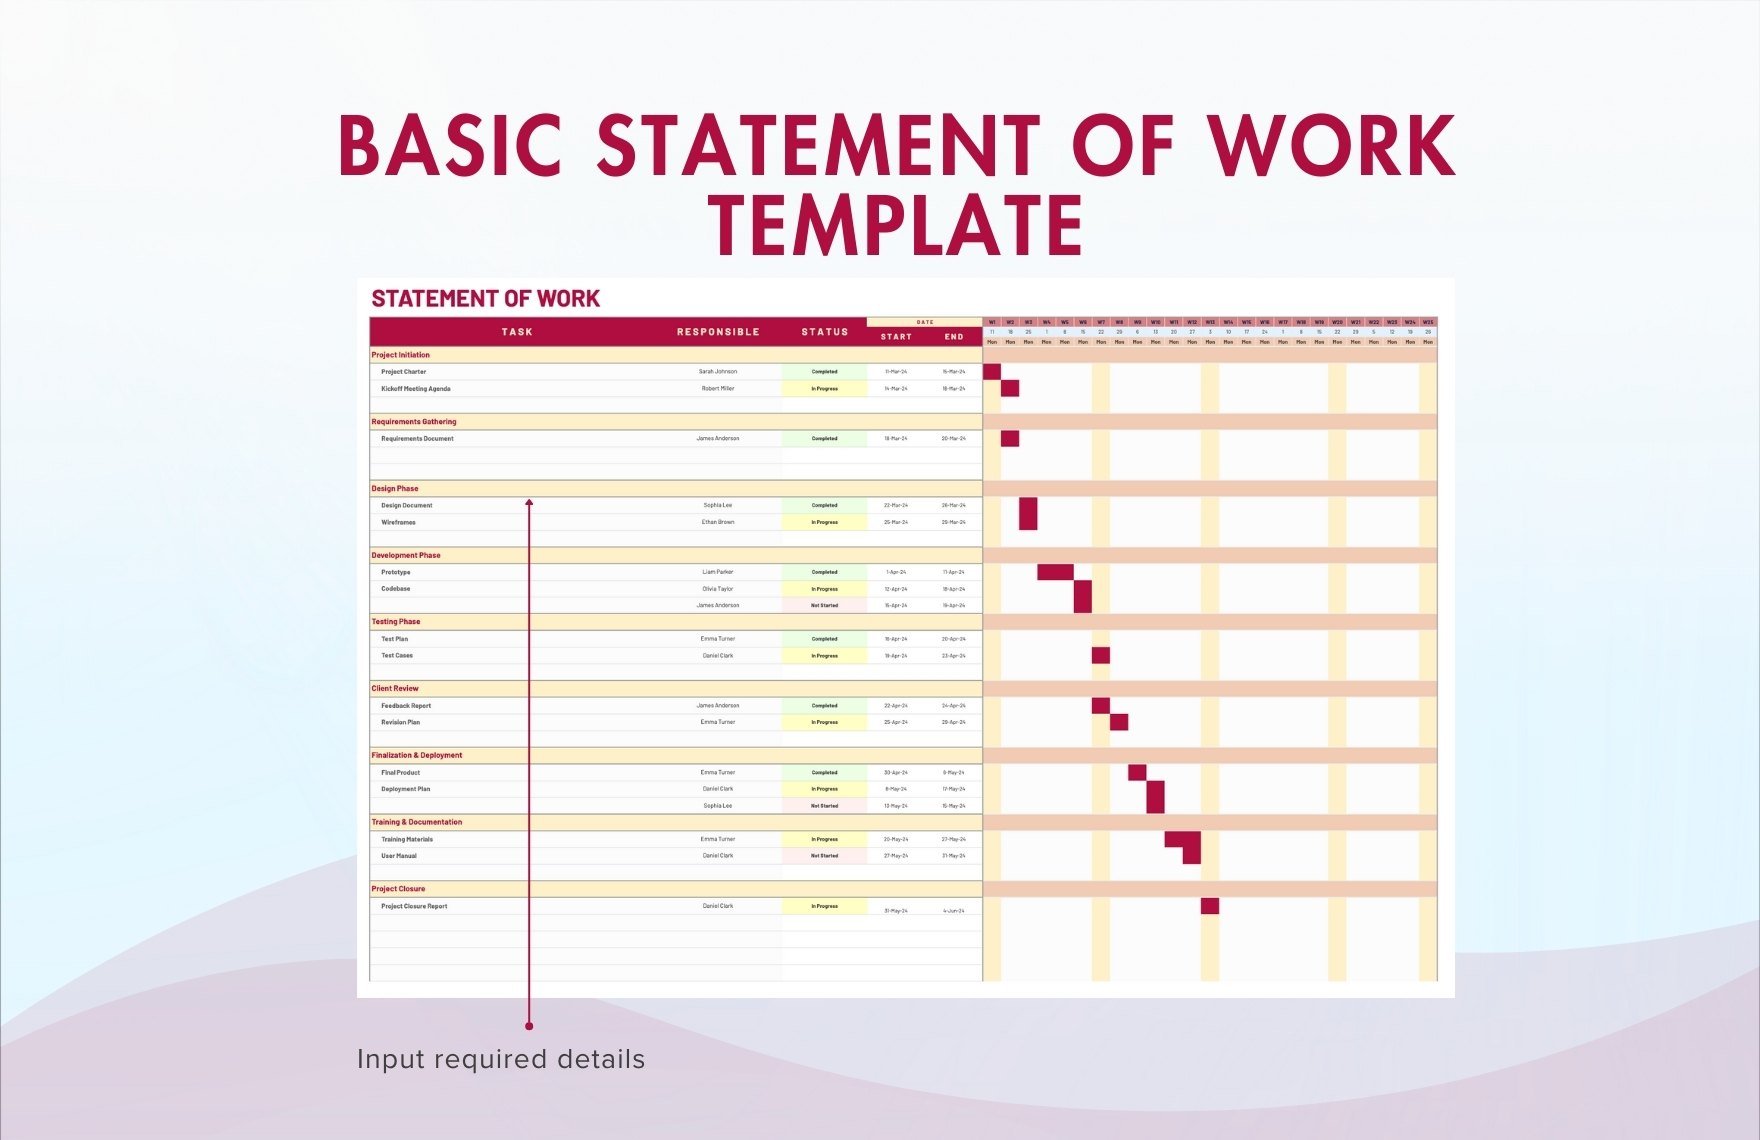 Basic Statement of Work Template